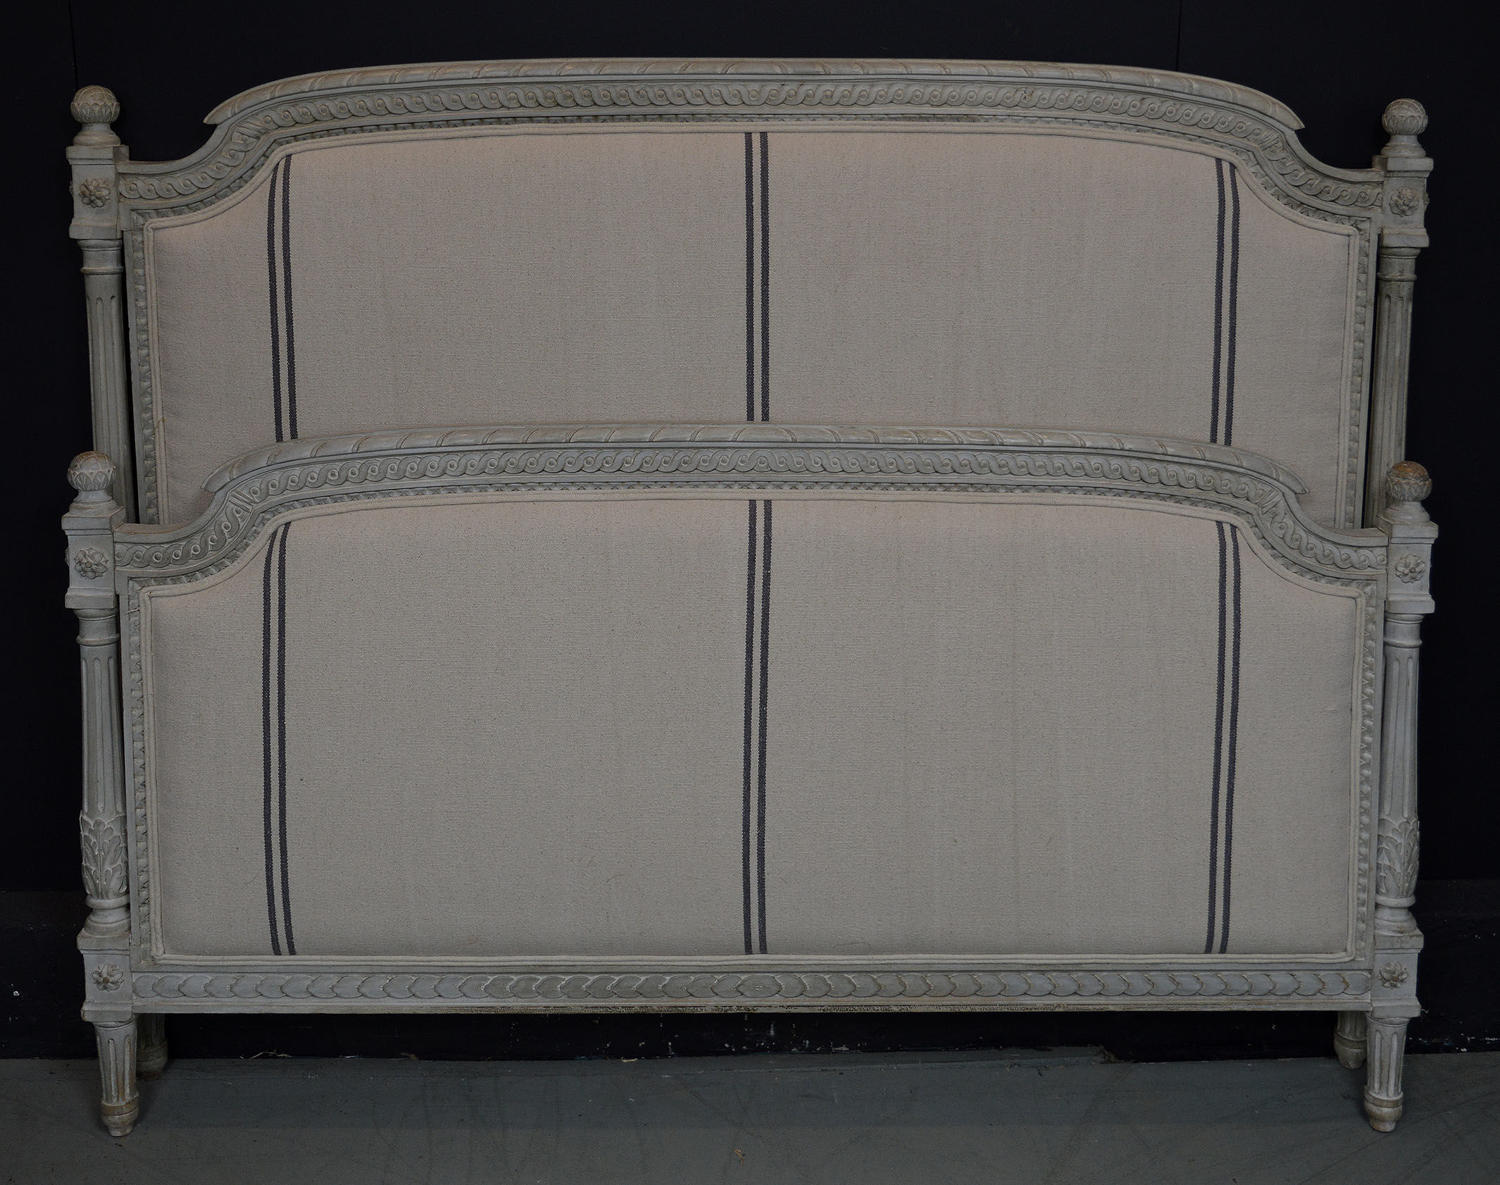 King Size Louis XVI style Upholstered Bedstead c1900-10